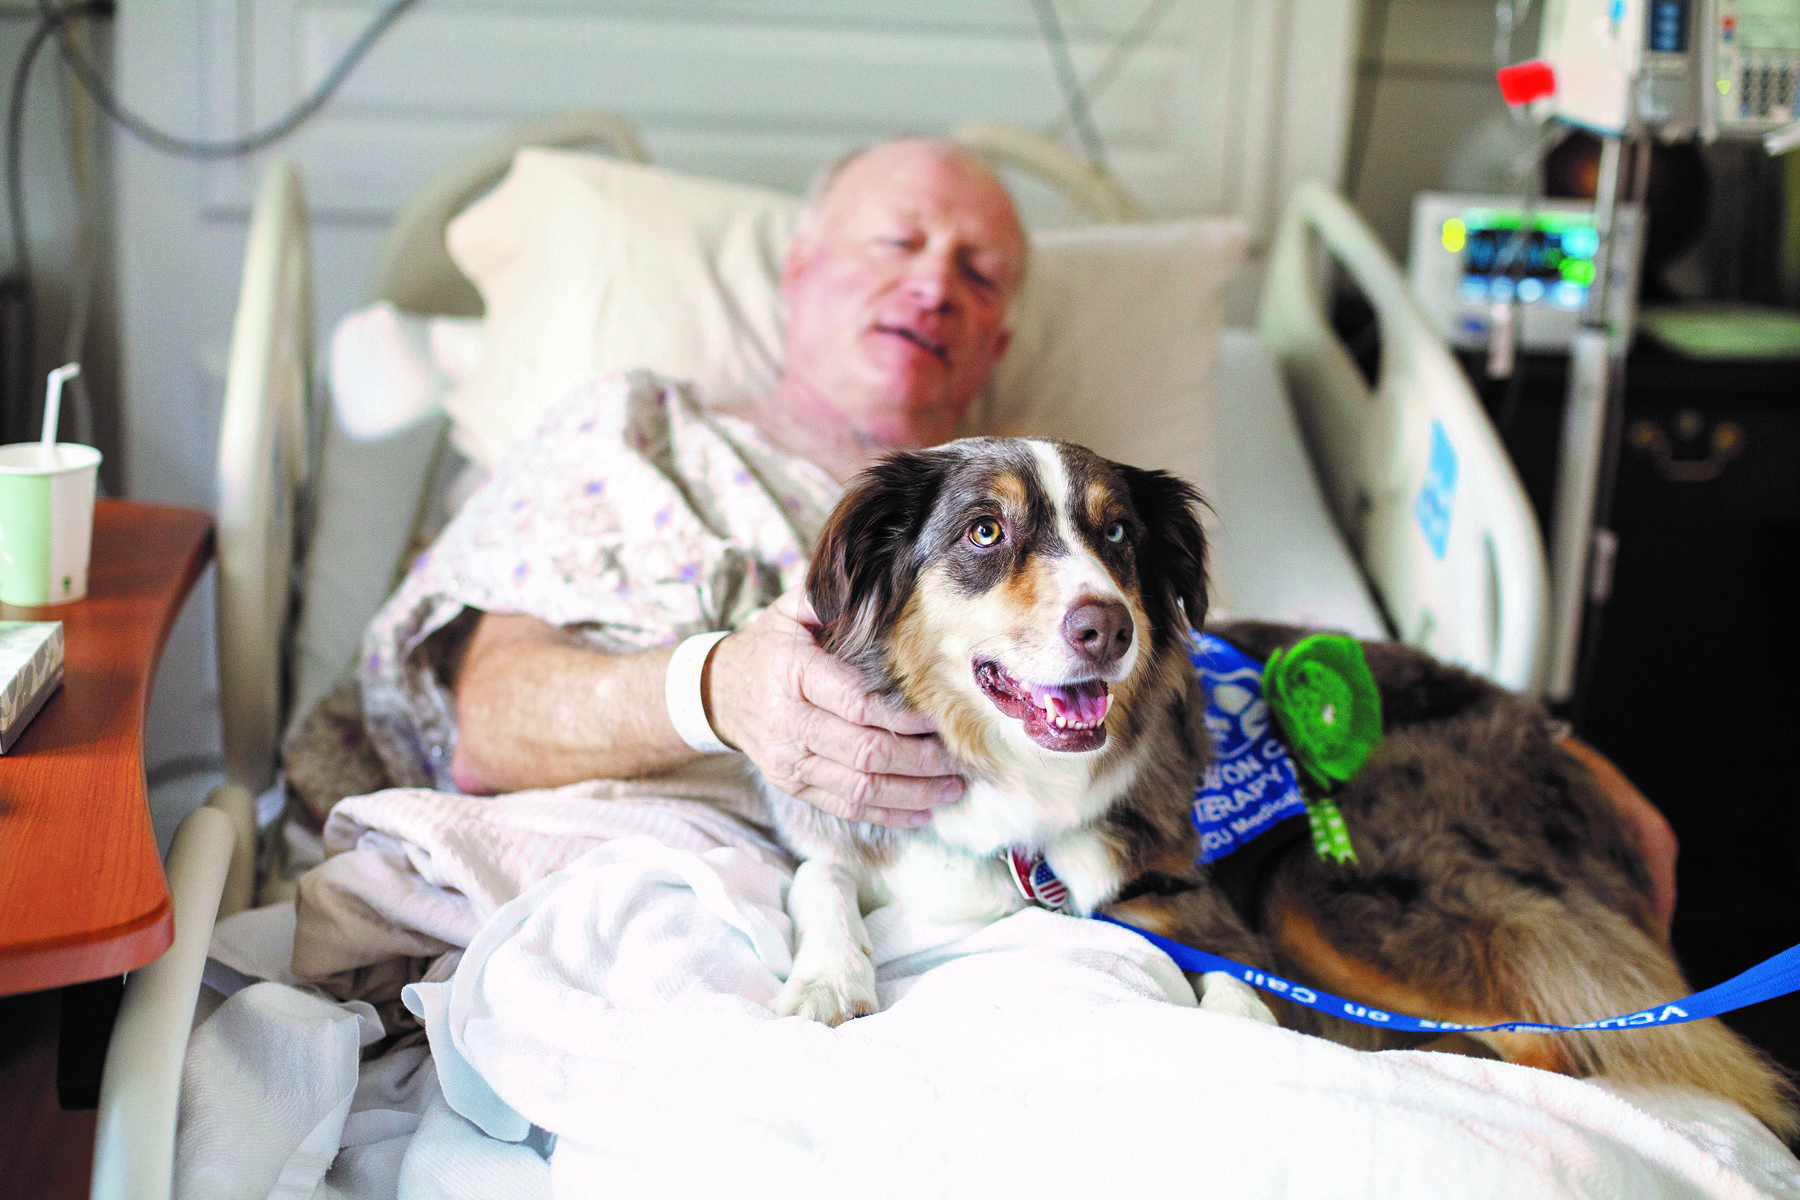 Petco Foundation's Helping Heroes Grant supports The Center for Human-Animal Interaction